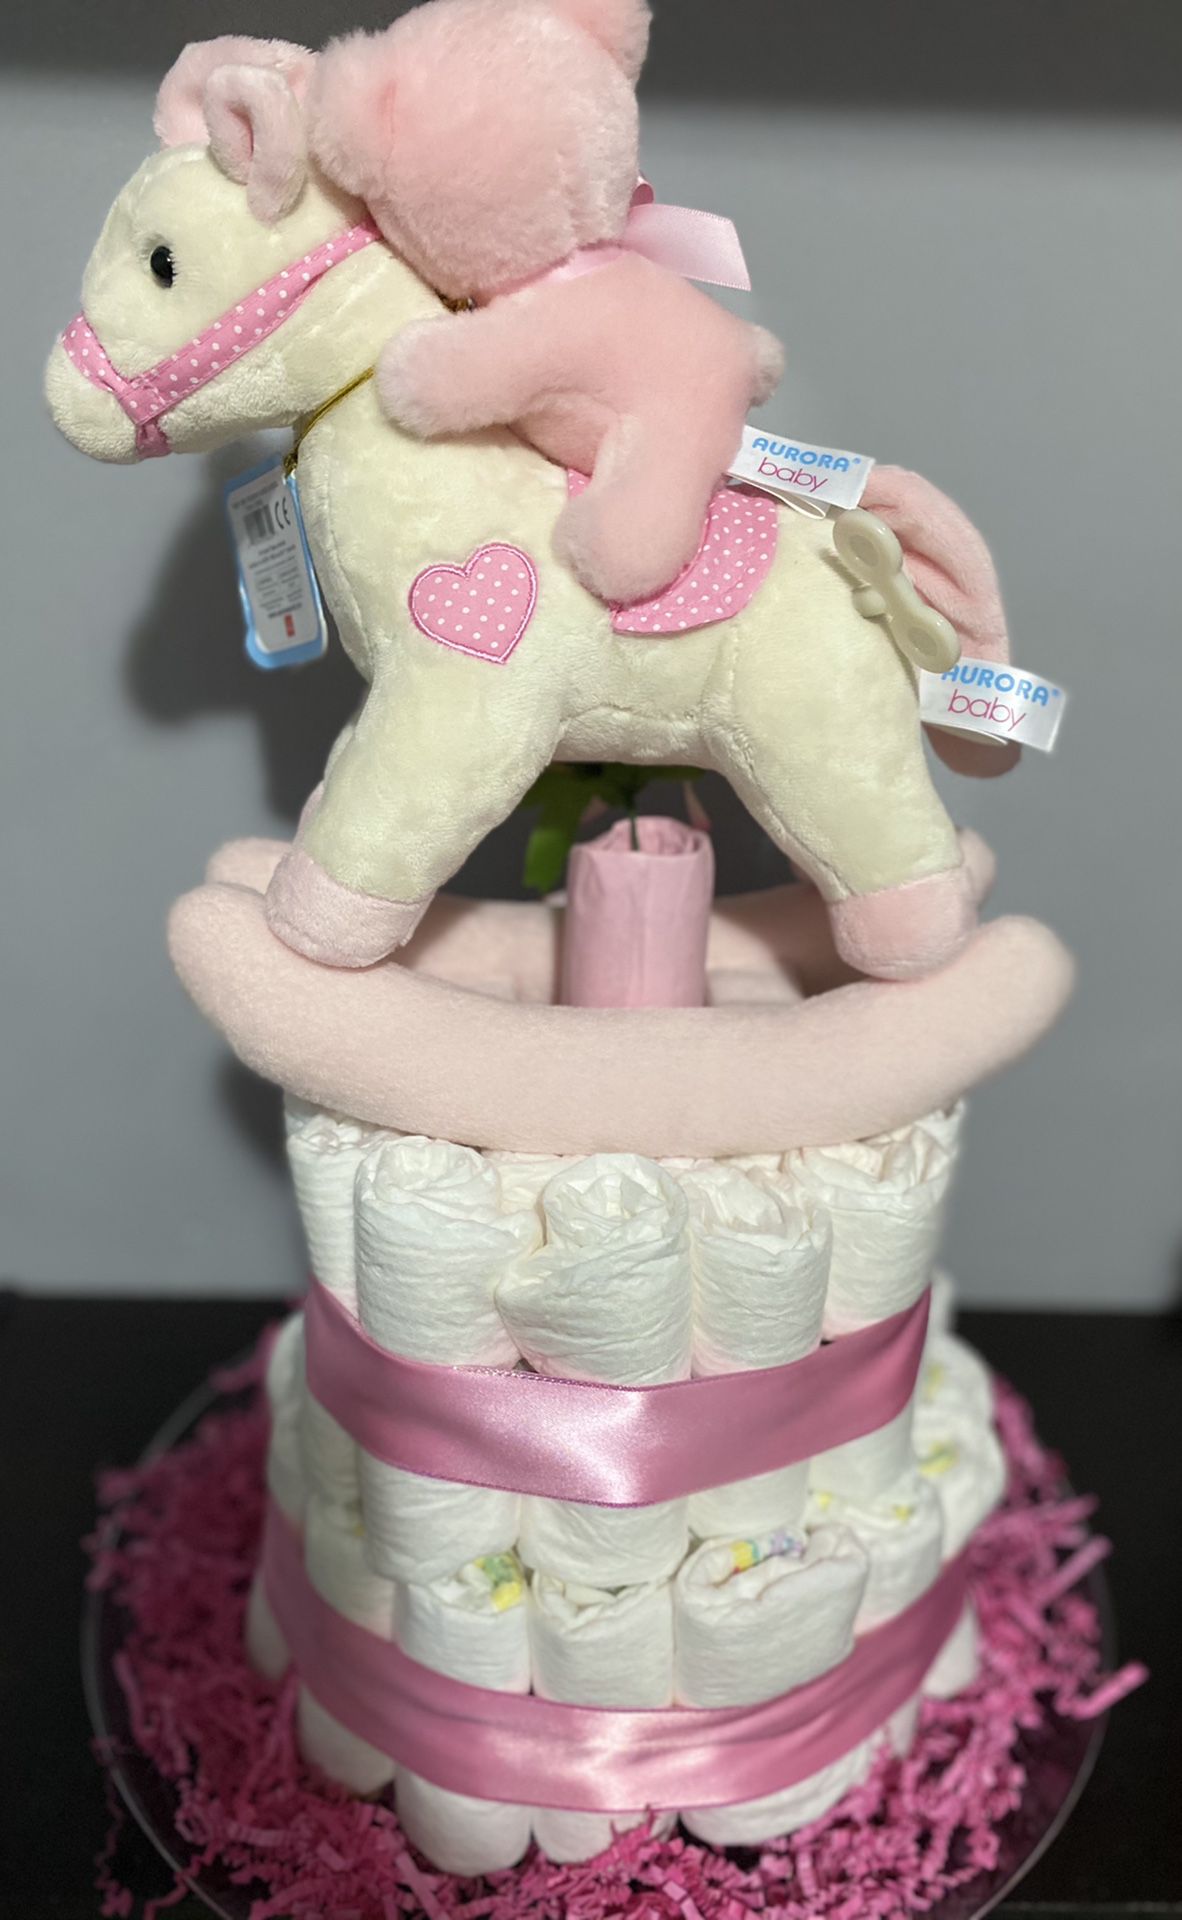 Diaper cake with musical toy